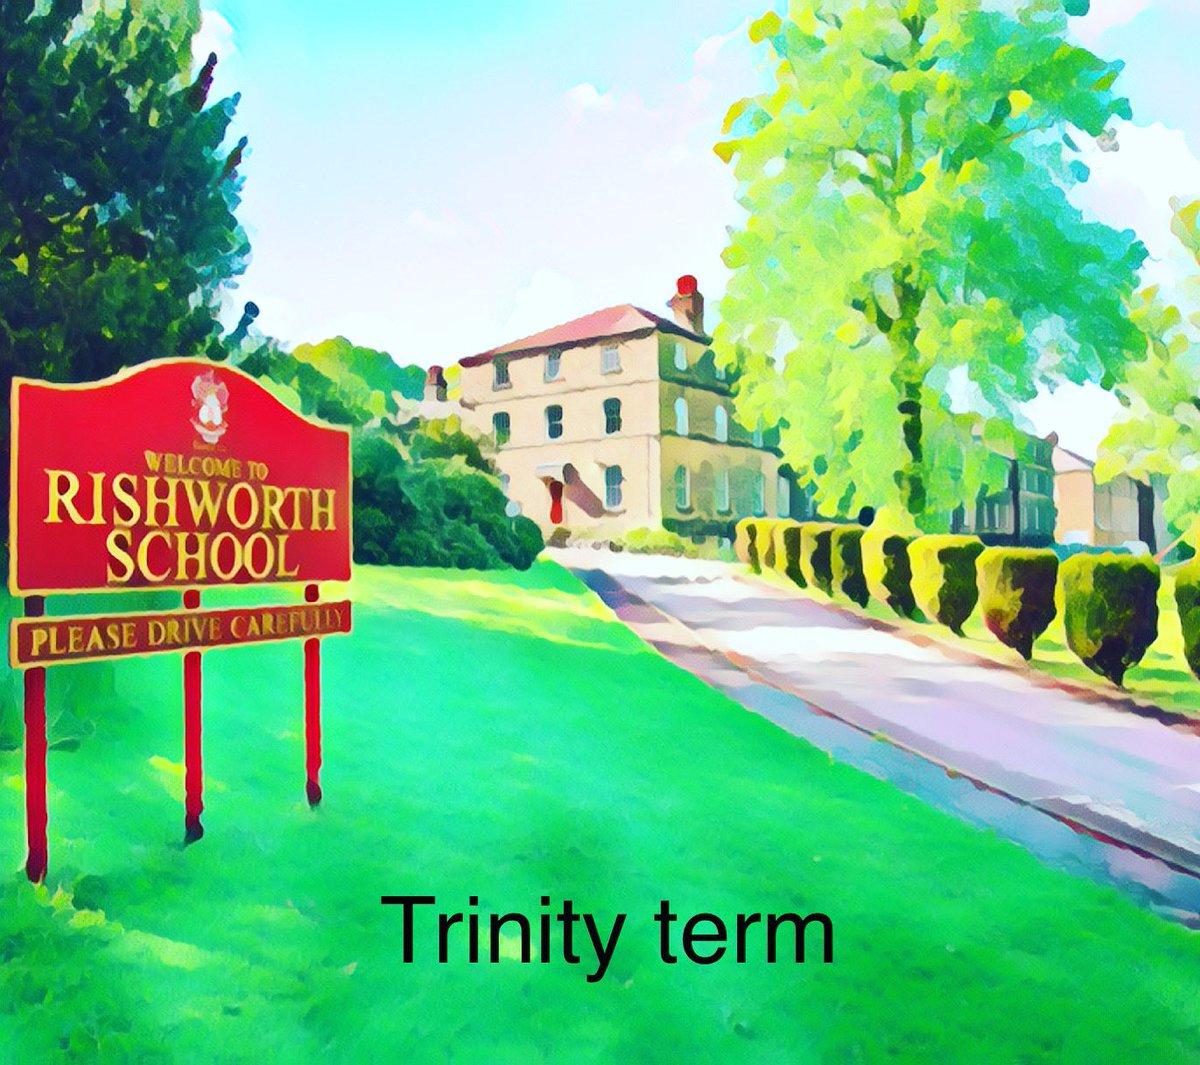 Welcome back to all our lovely students today. Let’s make it a trinity term to remember! #rishworthschool #trinityterm